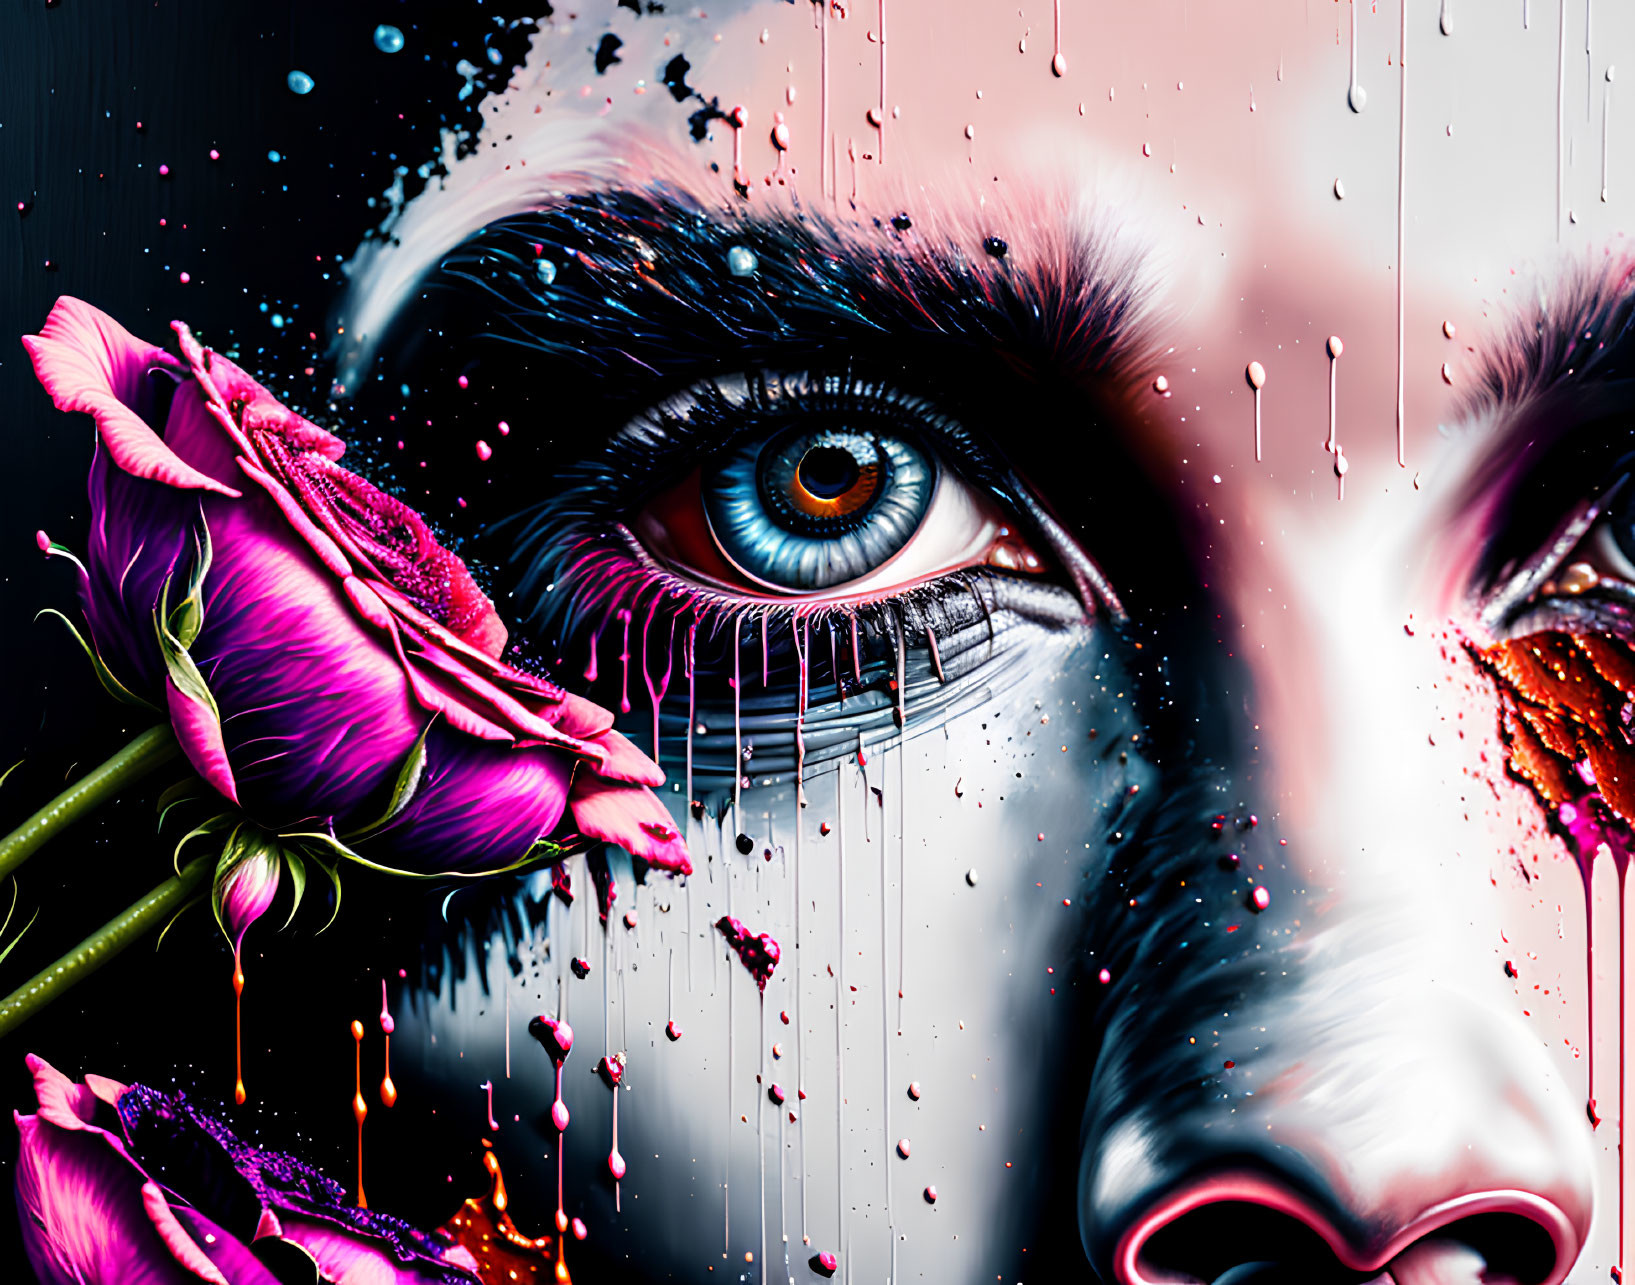 Colorful digital artwork: Close-up human eye with dripping effect and detailed flower